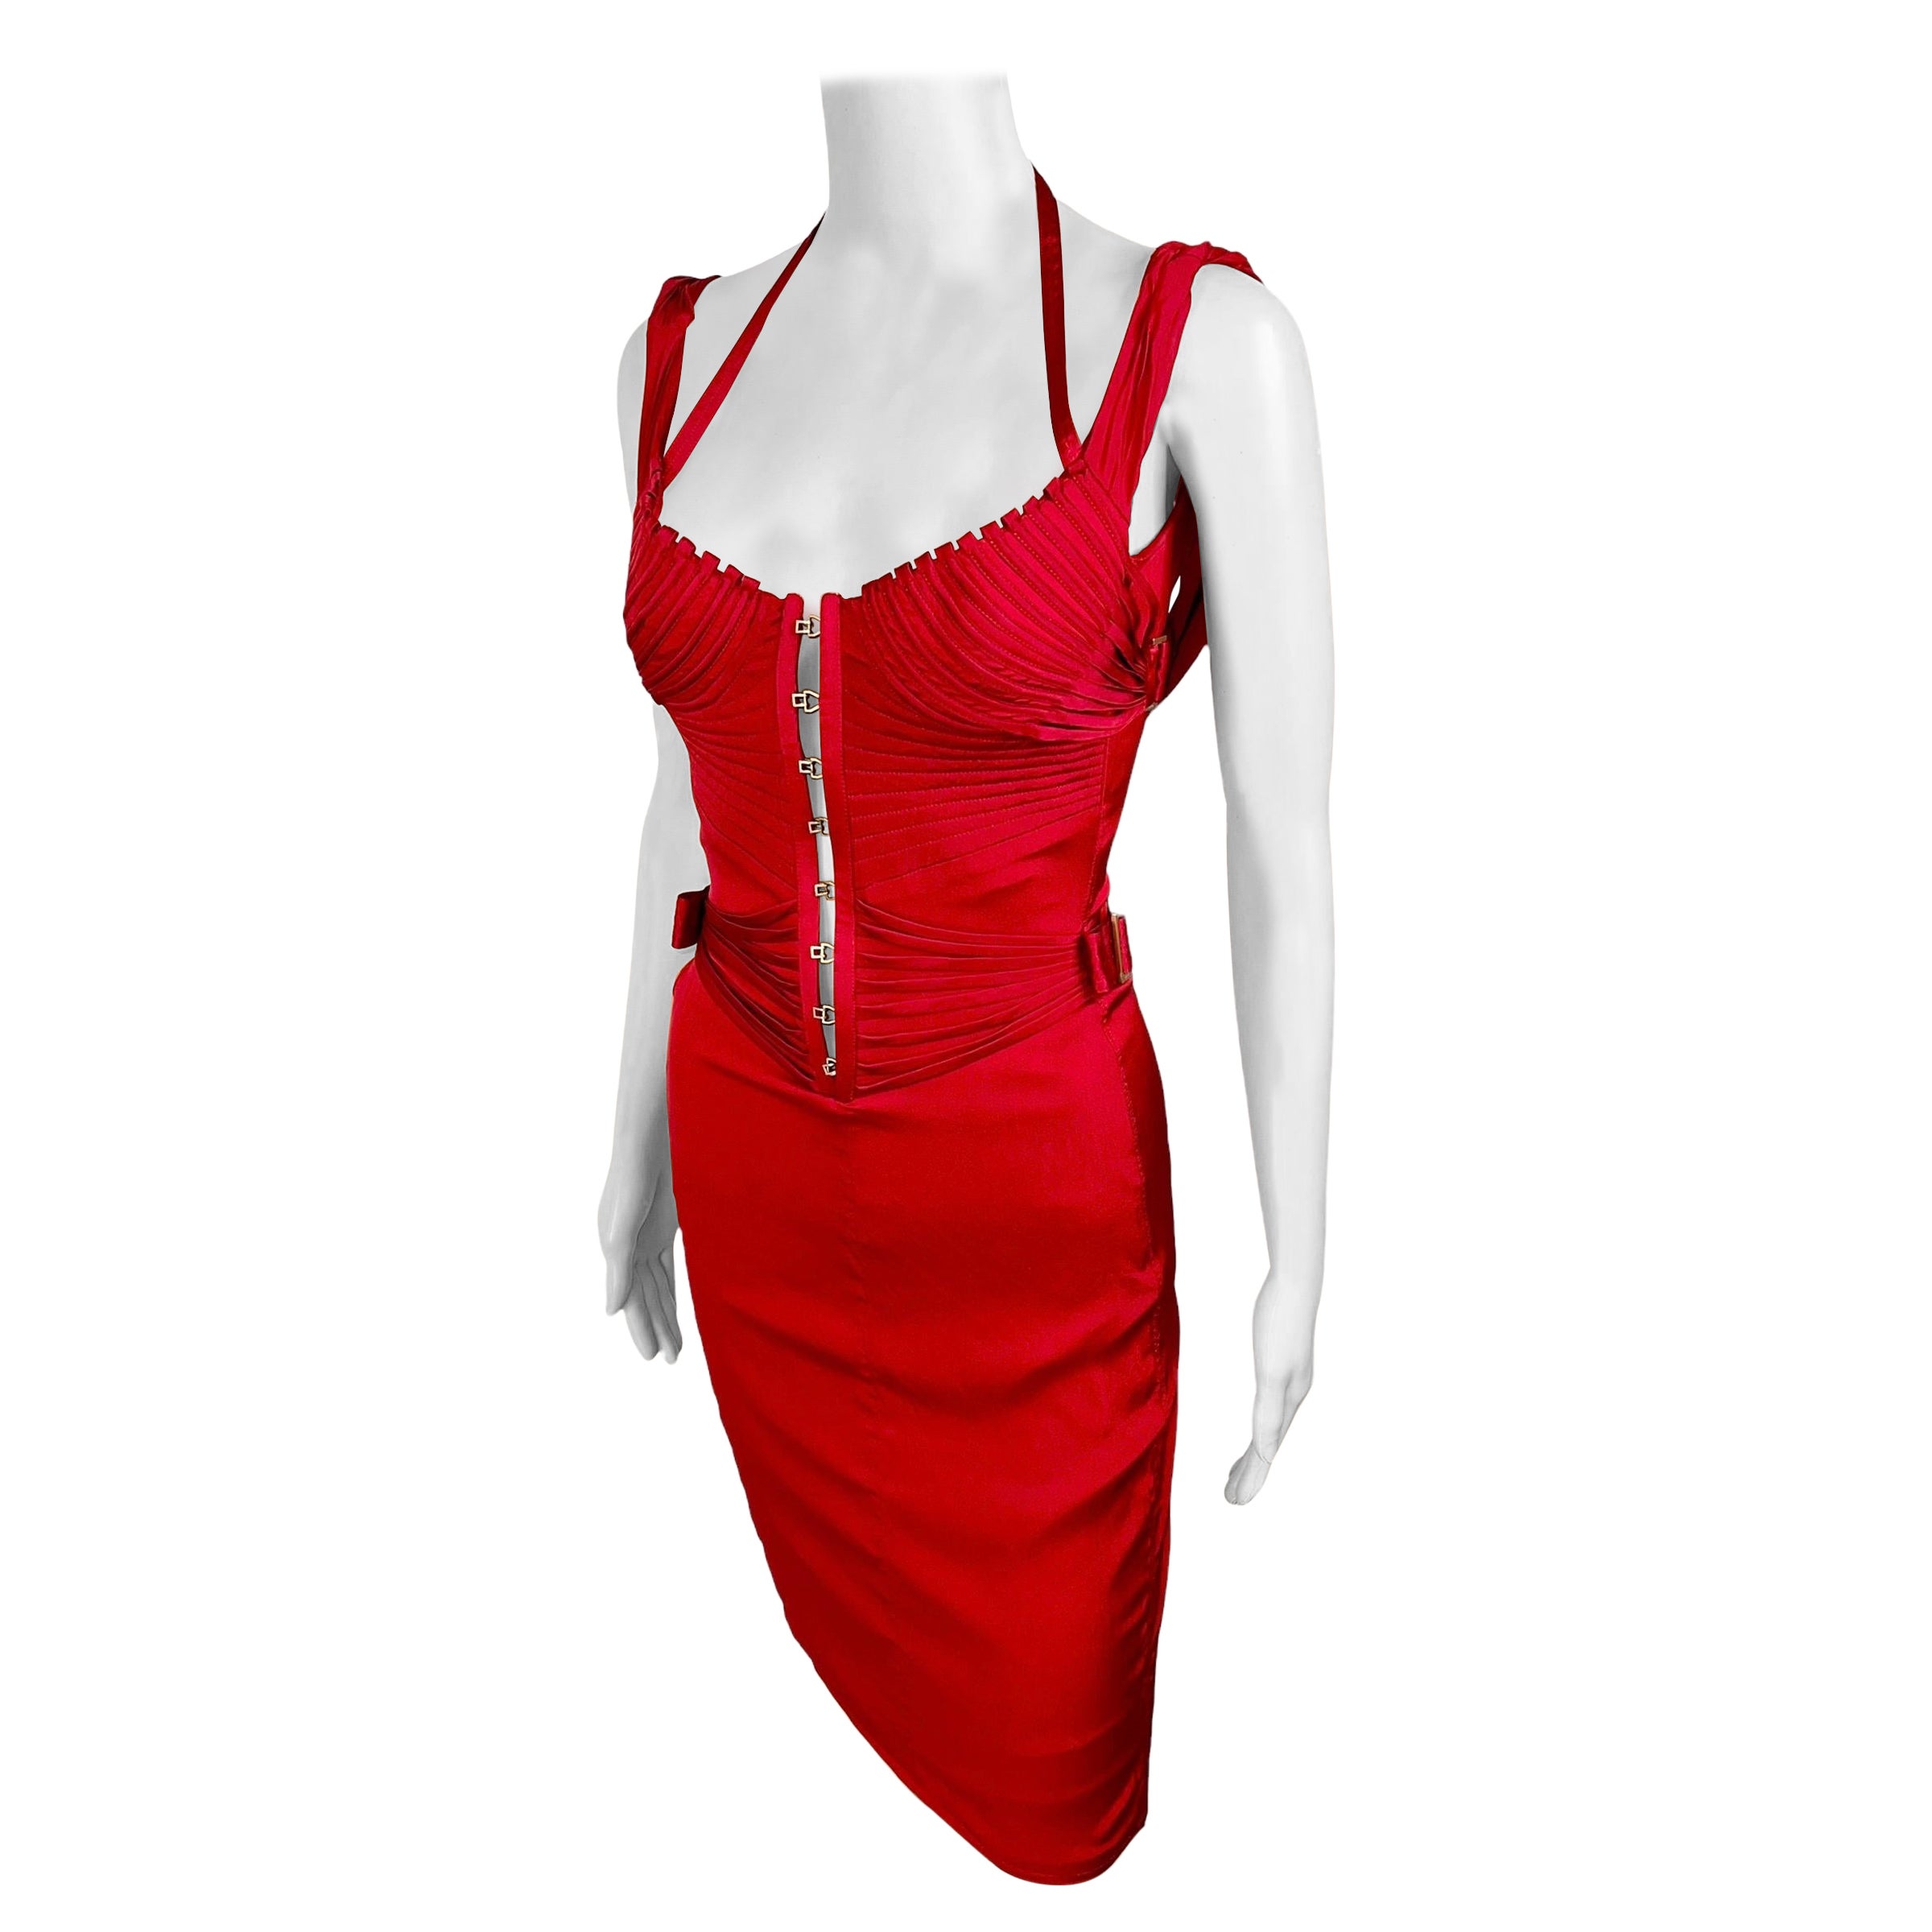 Tom Ford for Gucci F/W 2003 Runway Bustier Corset Silk Red Dress